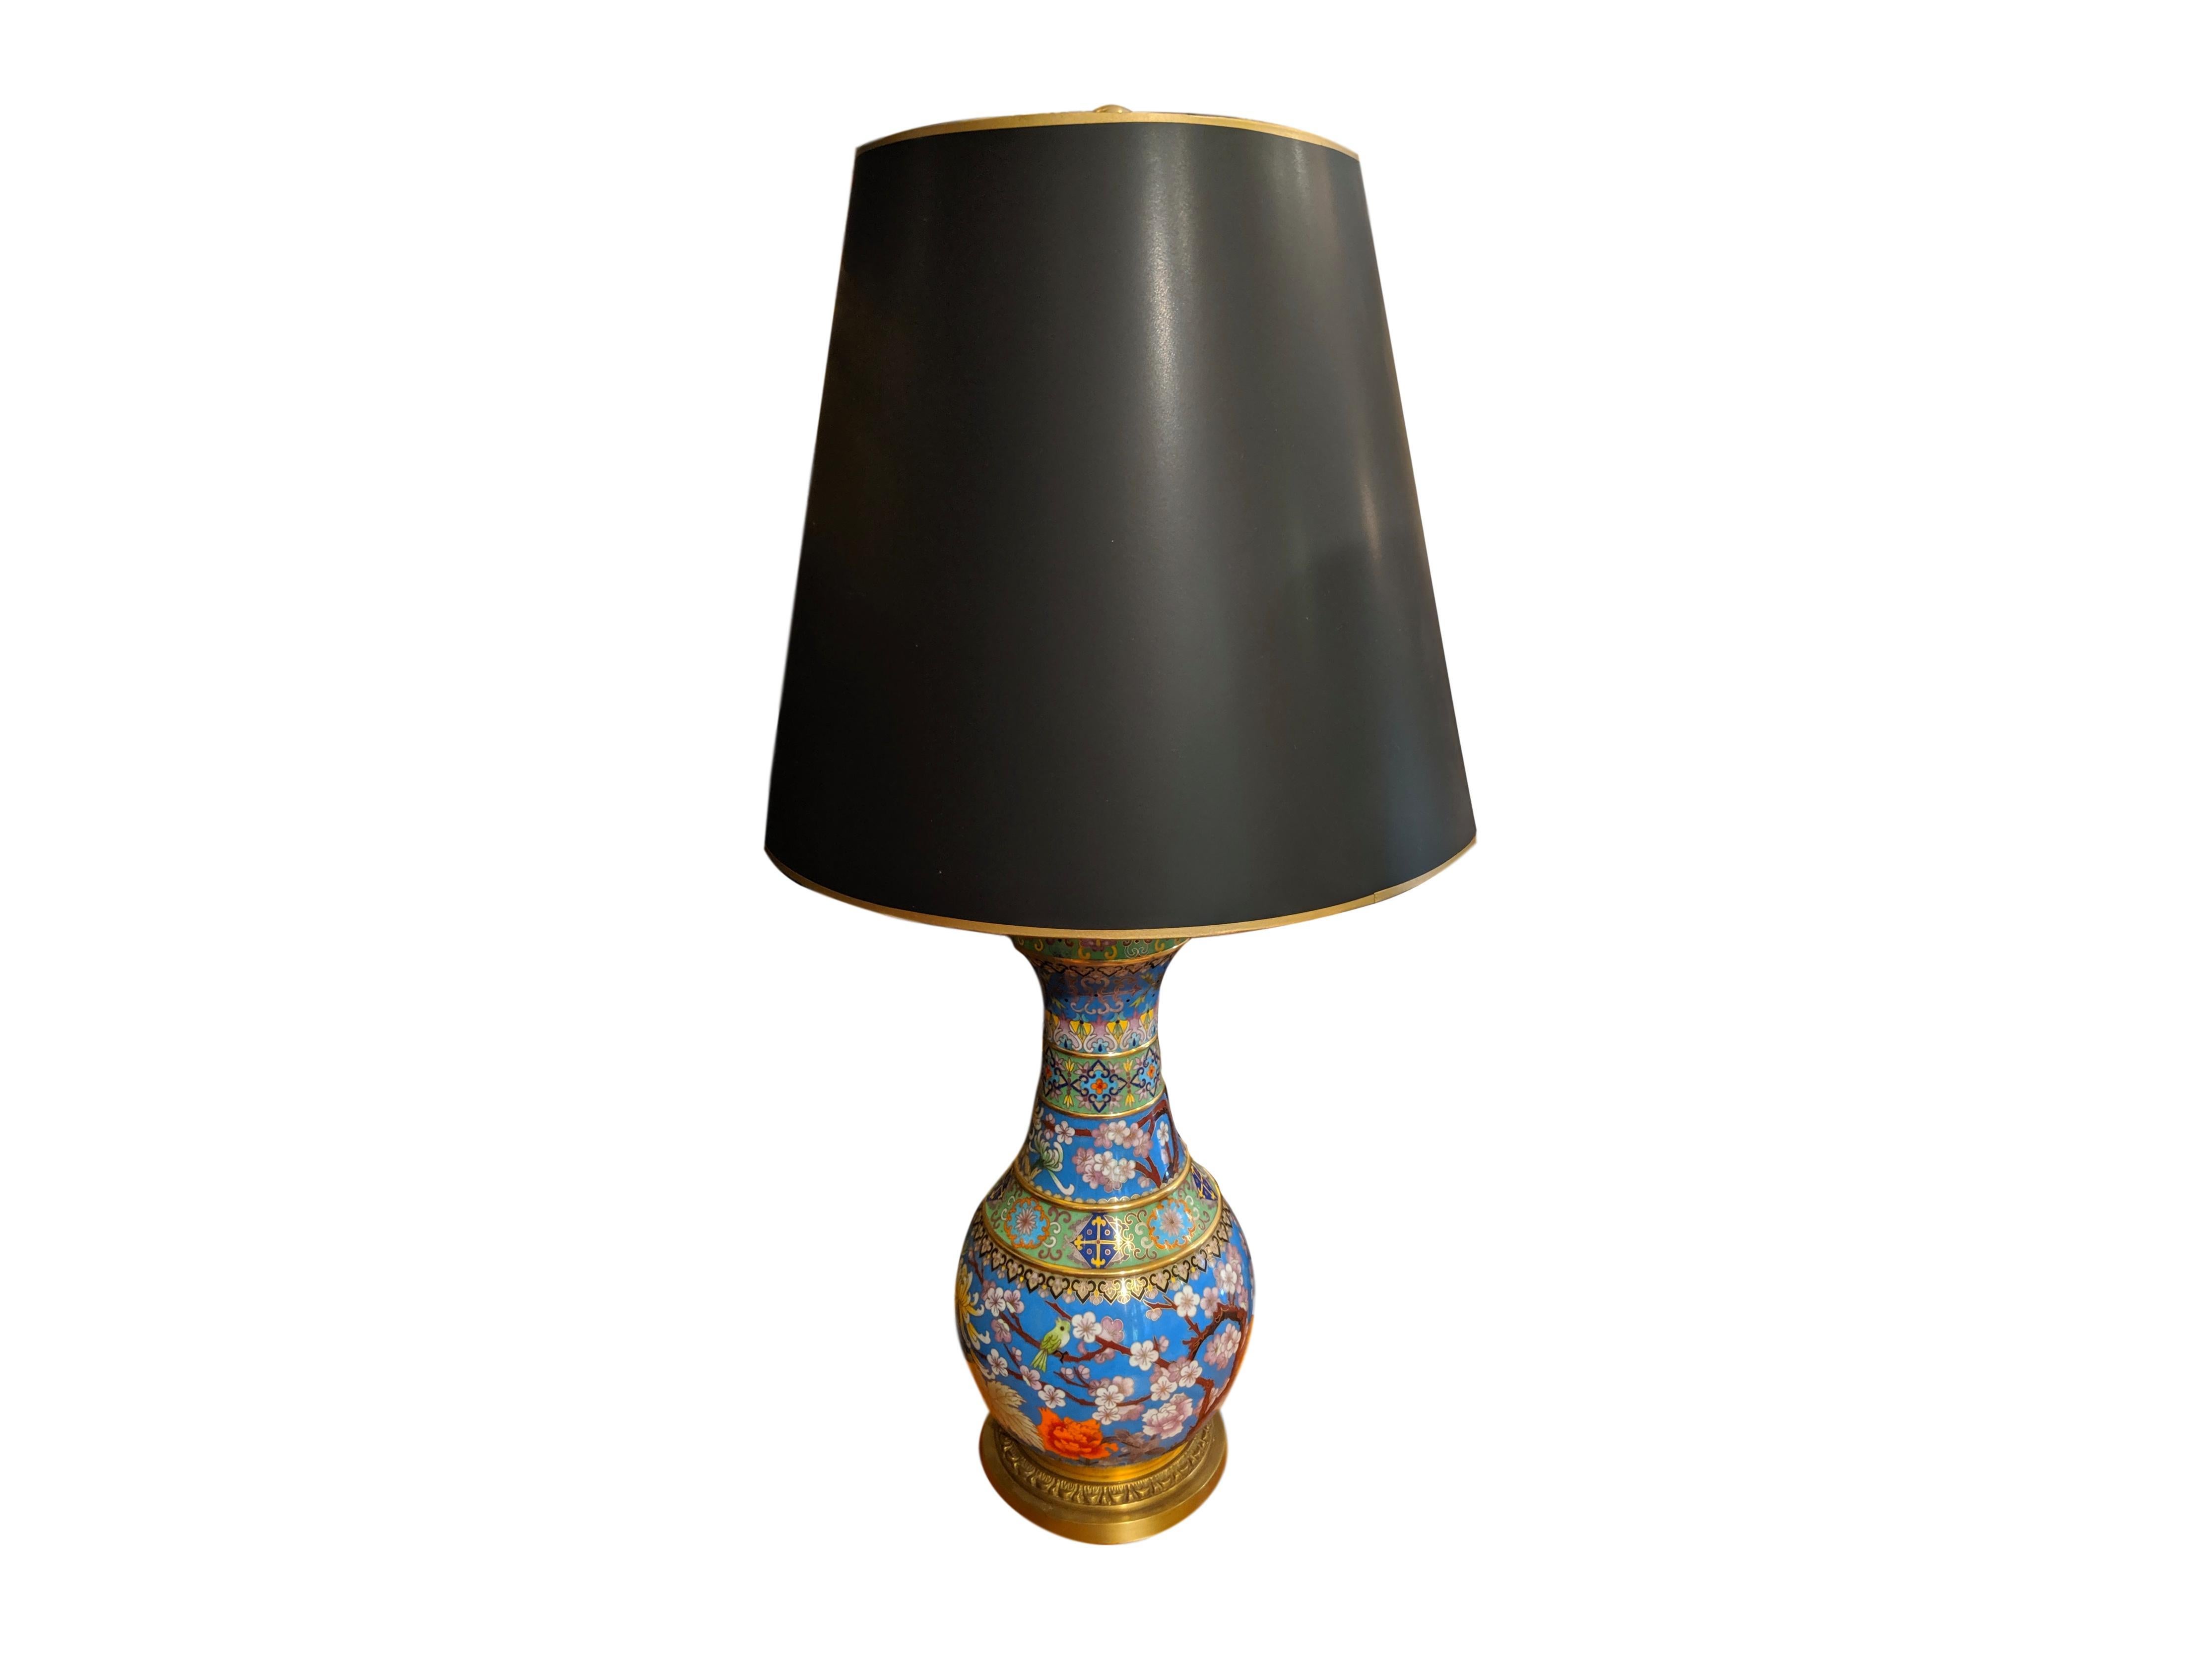 English Pair of 20th Century Cloisonné Vases Converted to Lamps